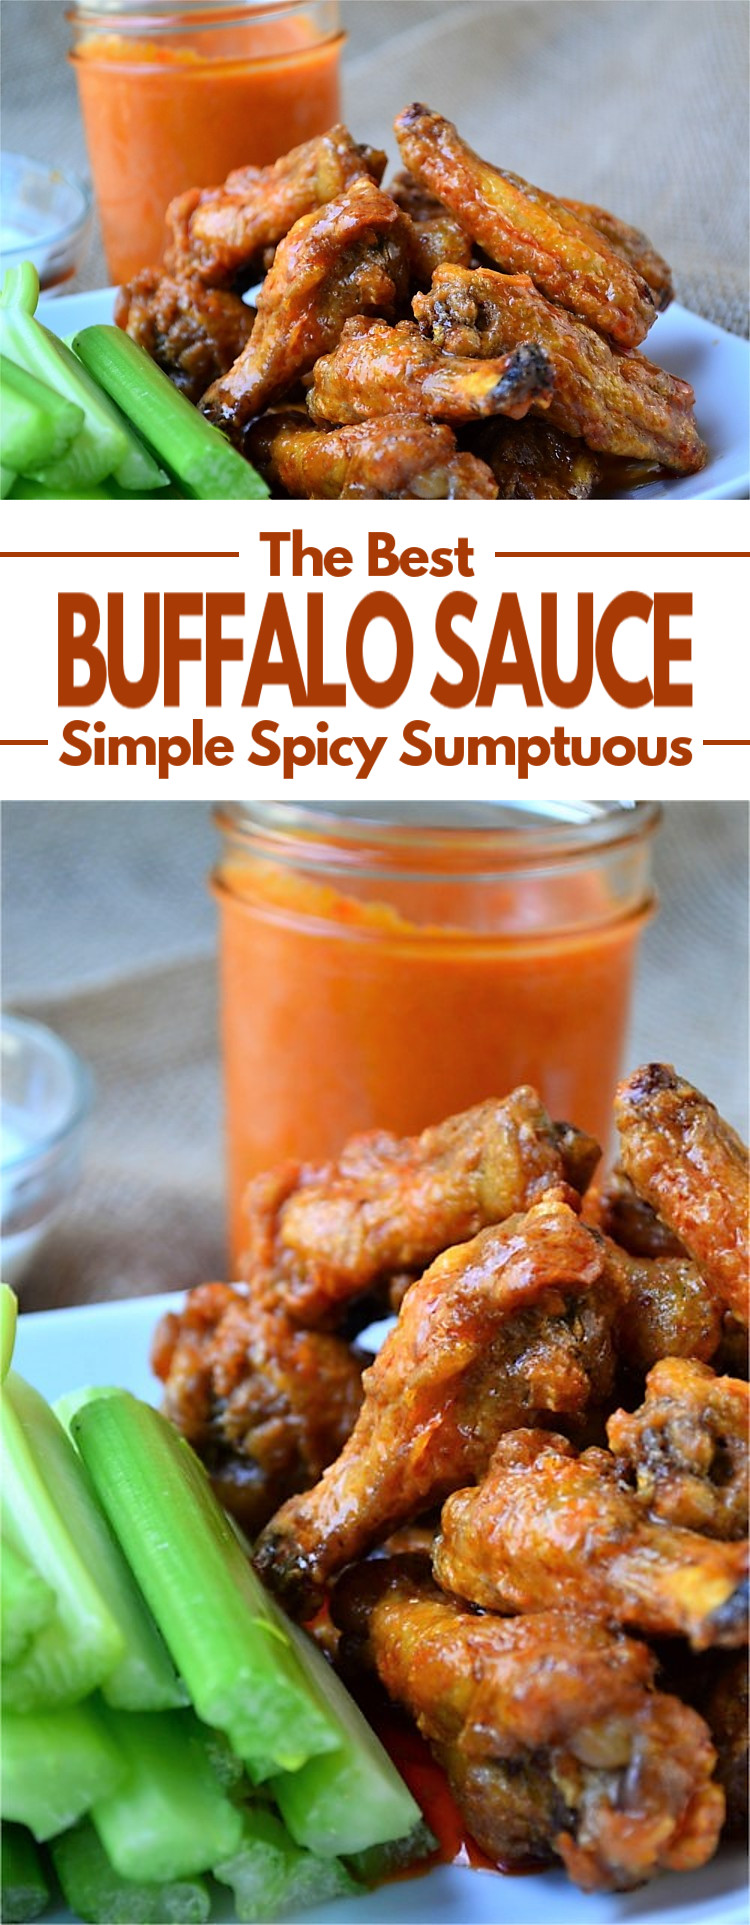 Simple Buffalo Sauce - A simple sauce that is slightly spicy, with a little heat and a nice buttery texture. This buffalo sauce is a milder and more sumptuous form of hot sauce and tastes amazing smothered over chicken wings or used to replace traditional hot sauce.